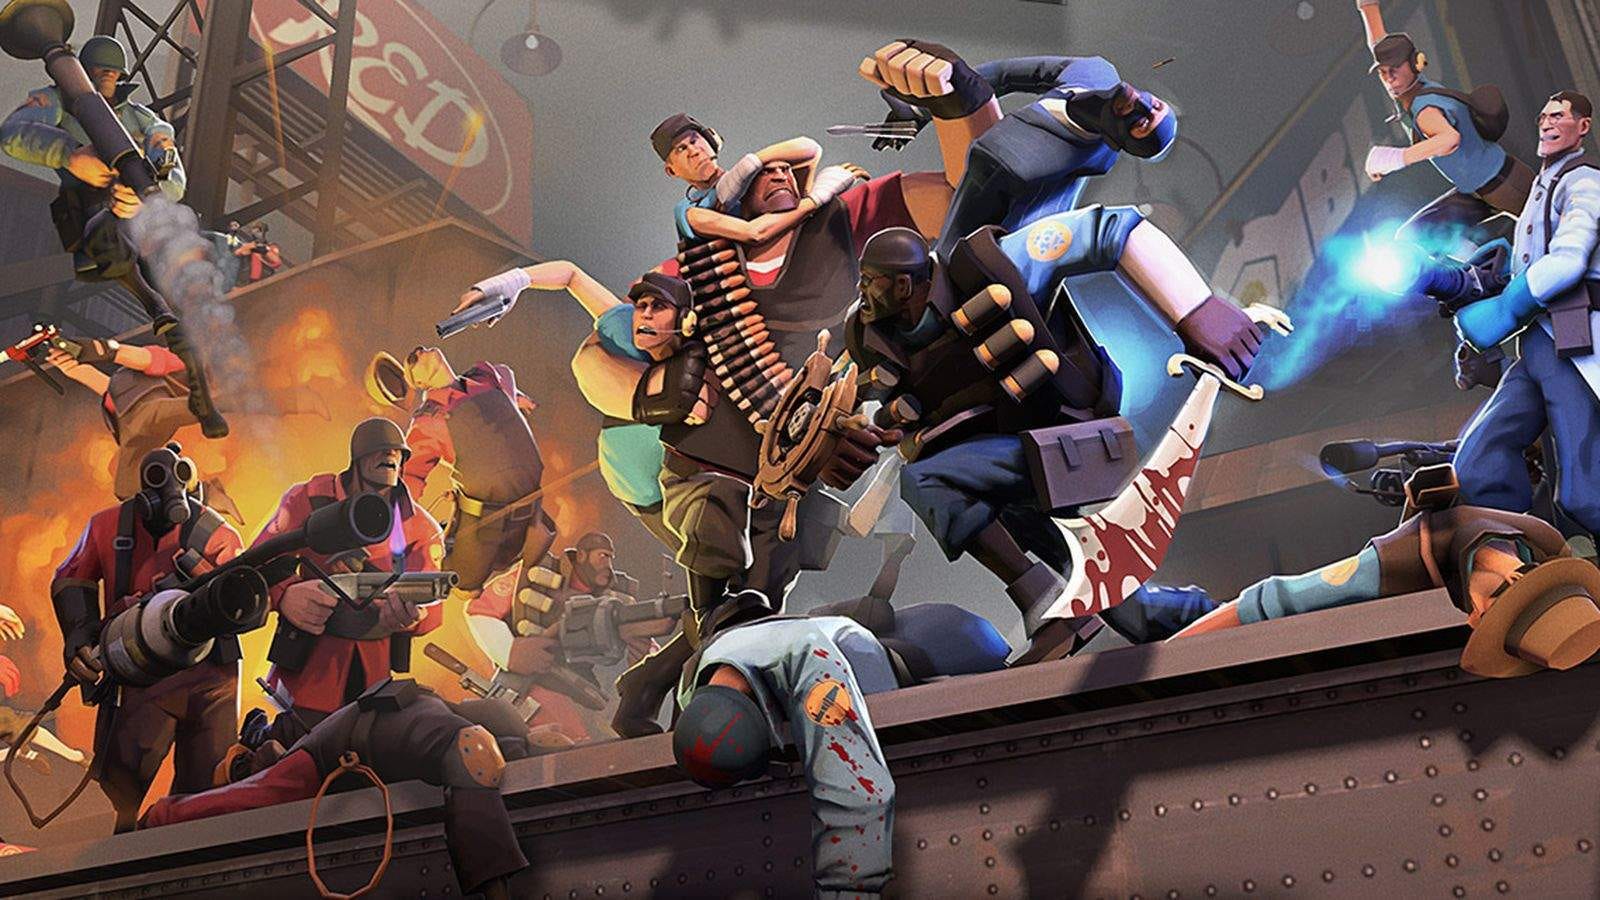 Hat's Off To You: Player Performance Analysis in Team Fortress 2